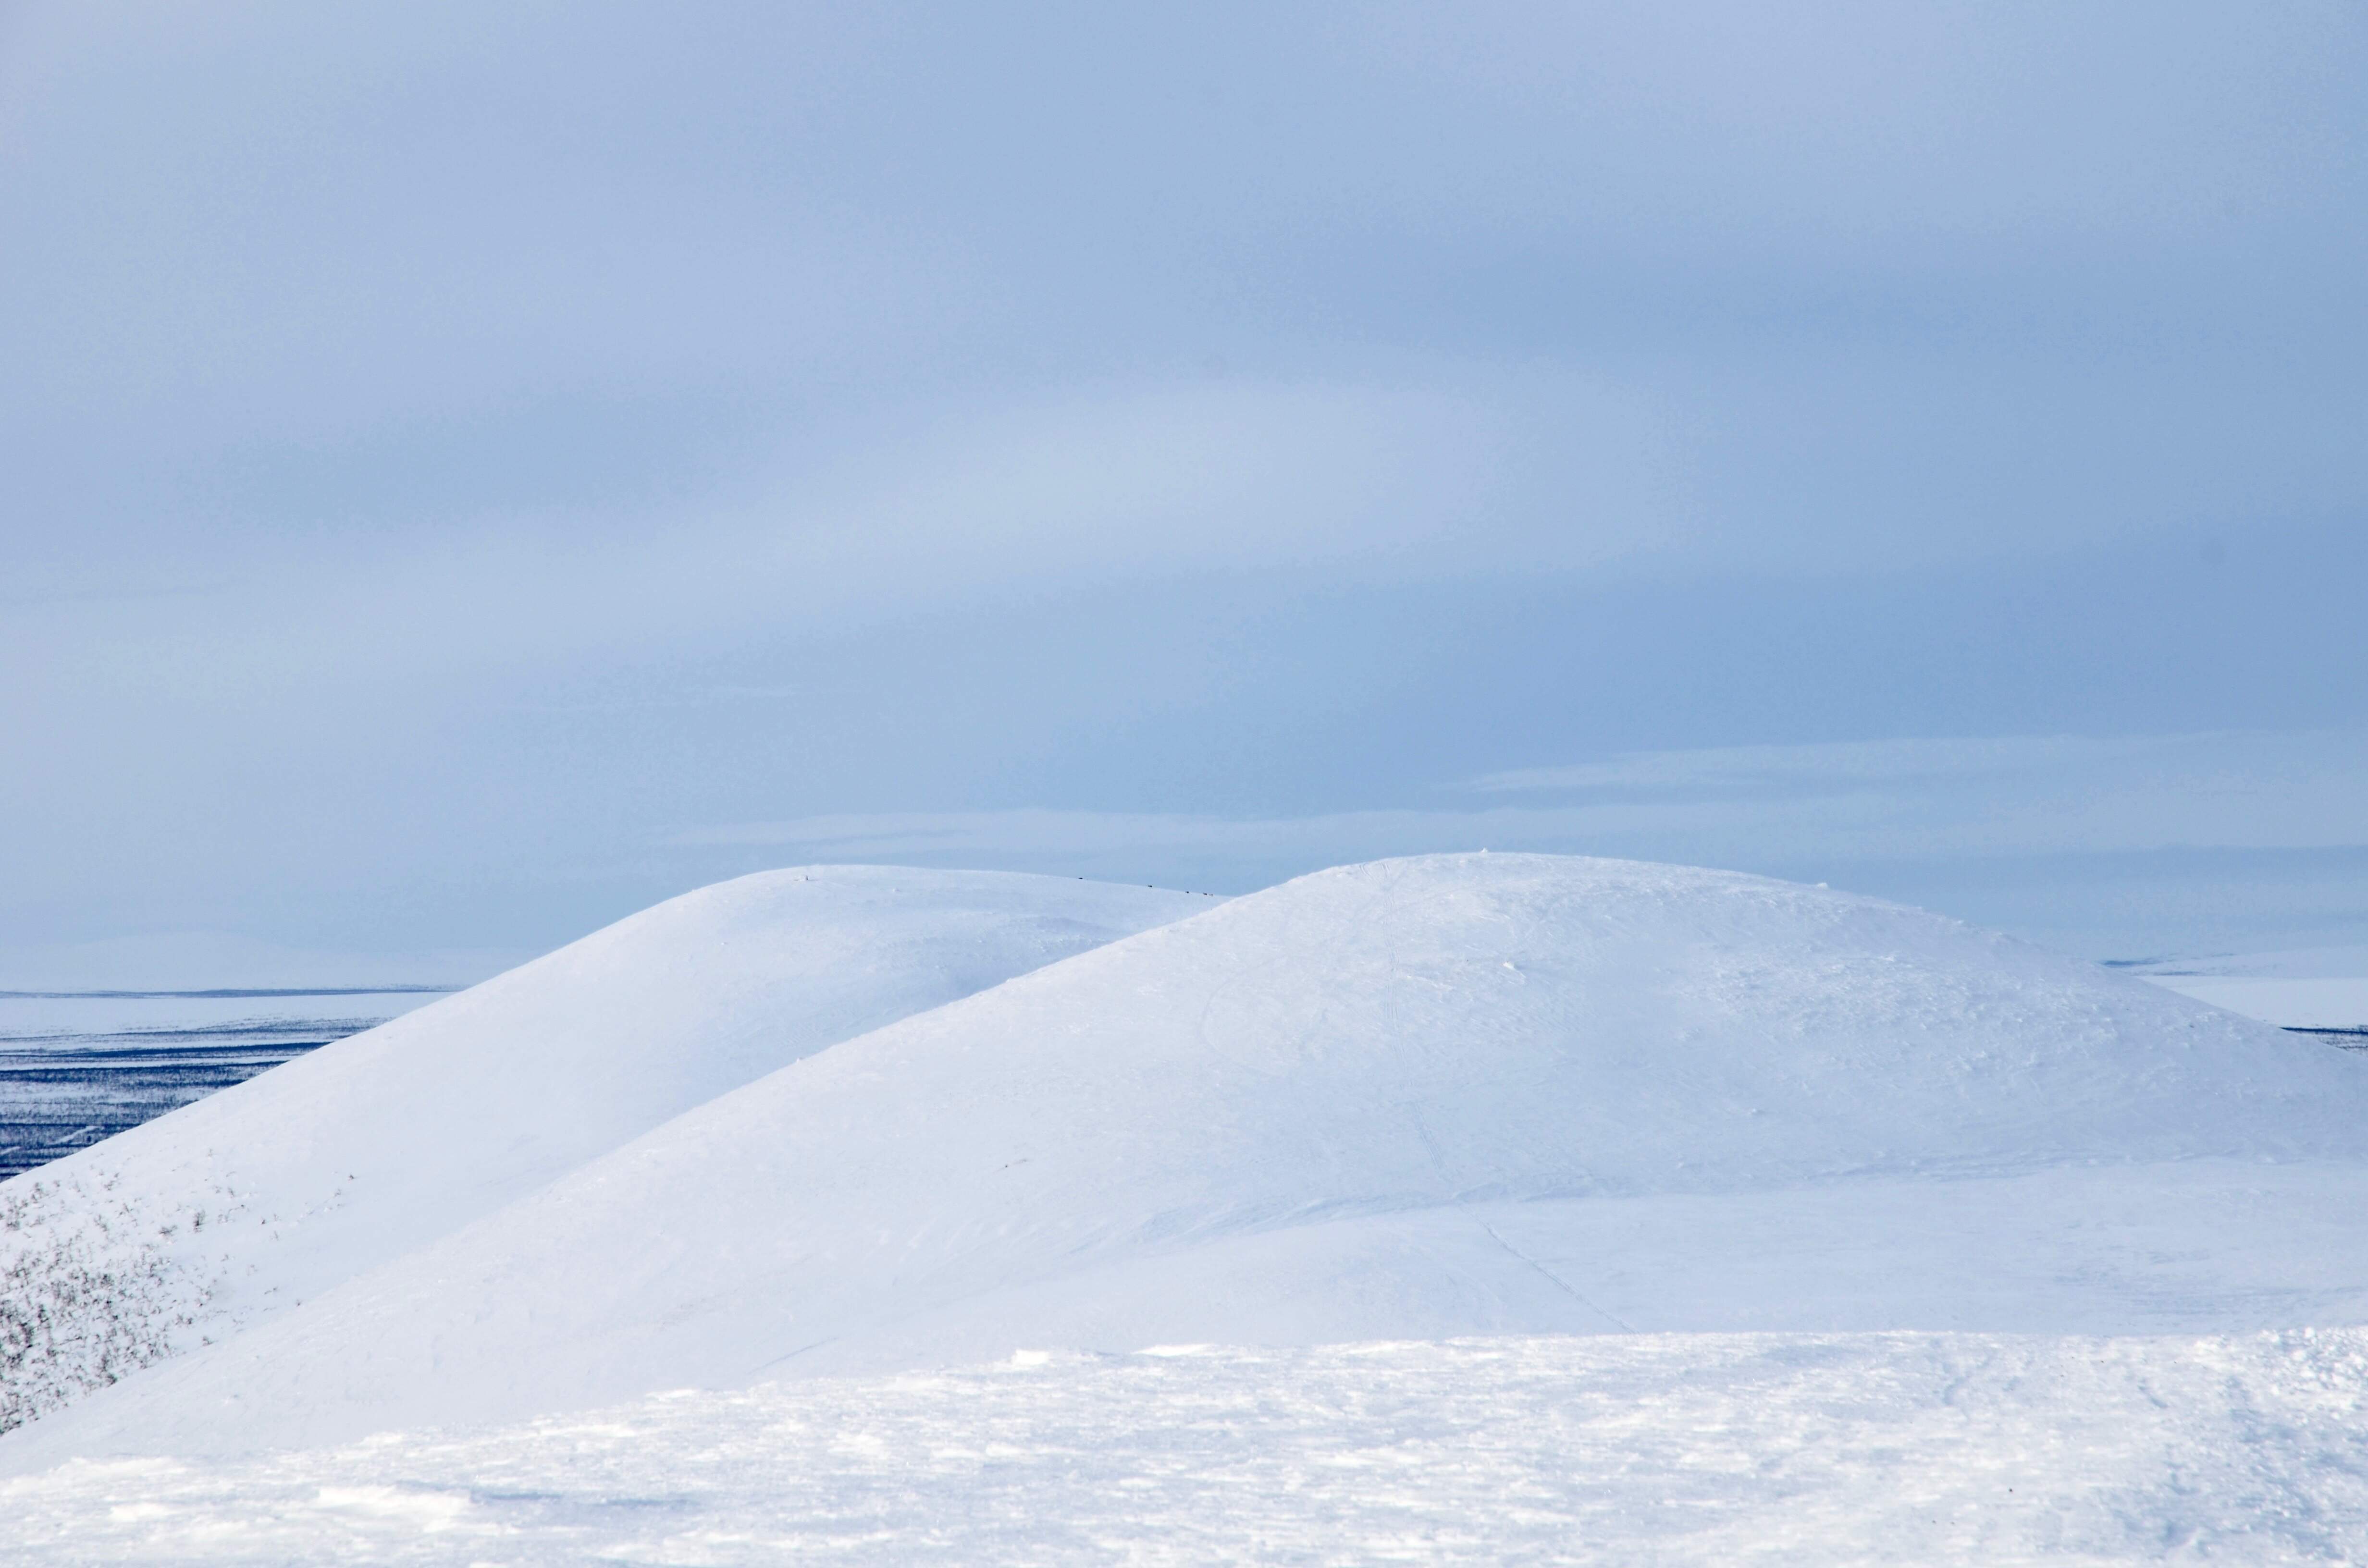 The White Horizon have many meanings, for example this completely white landscape.